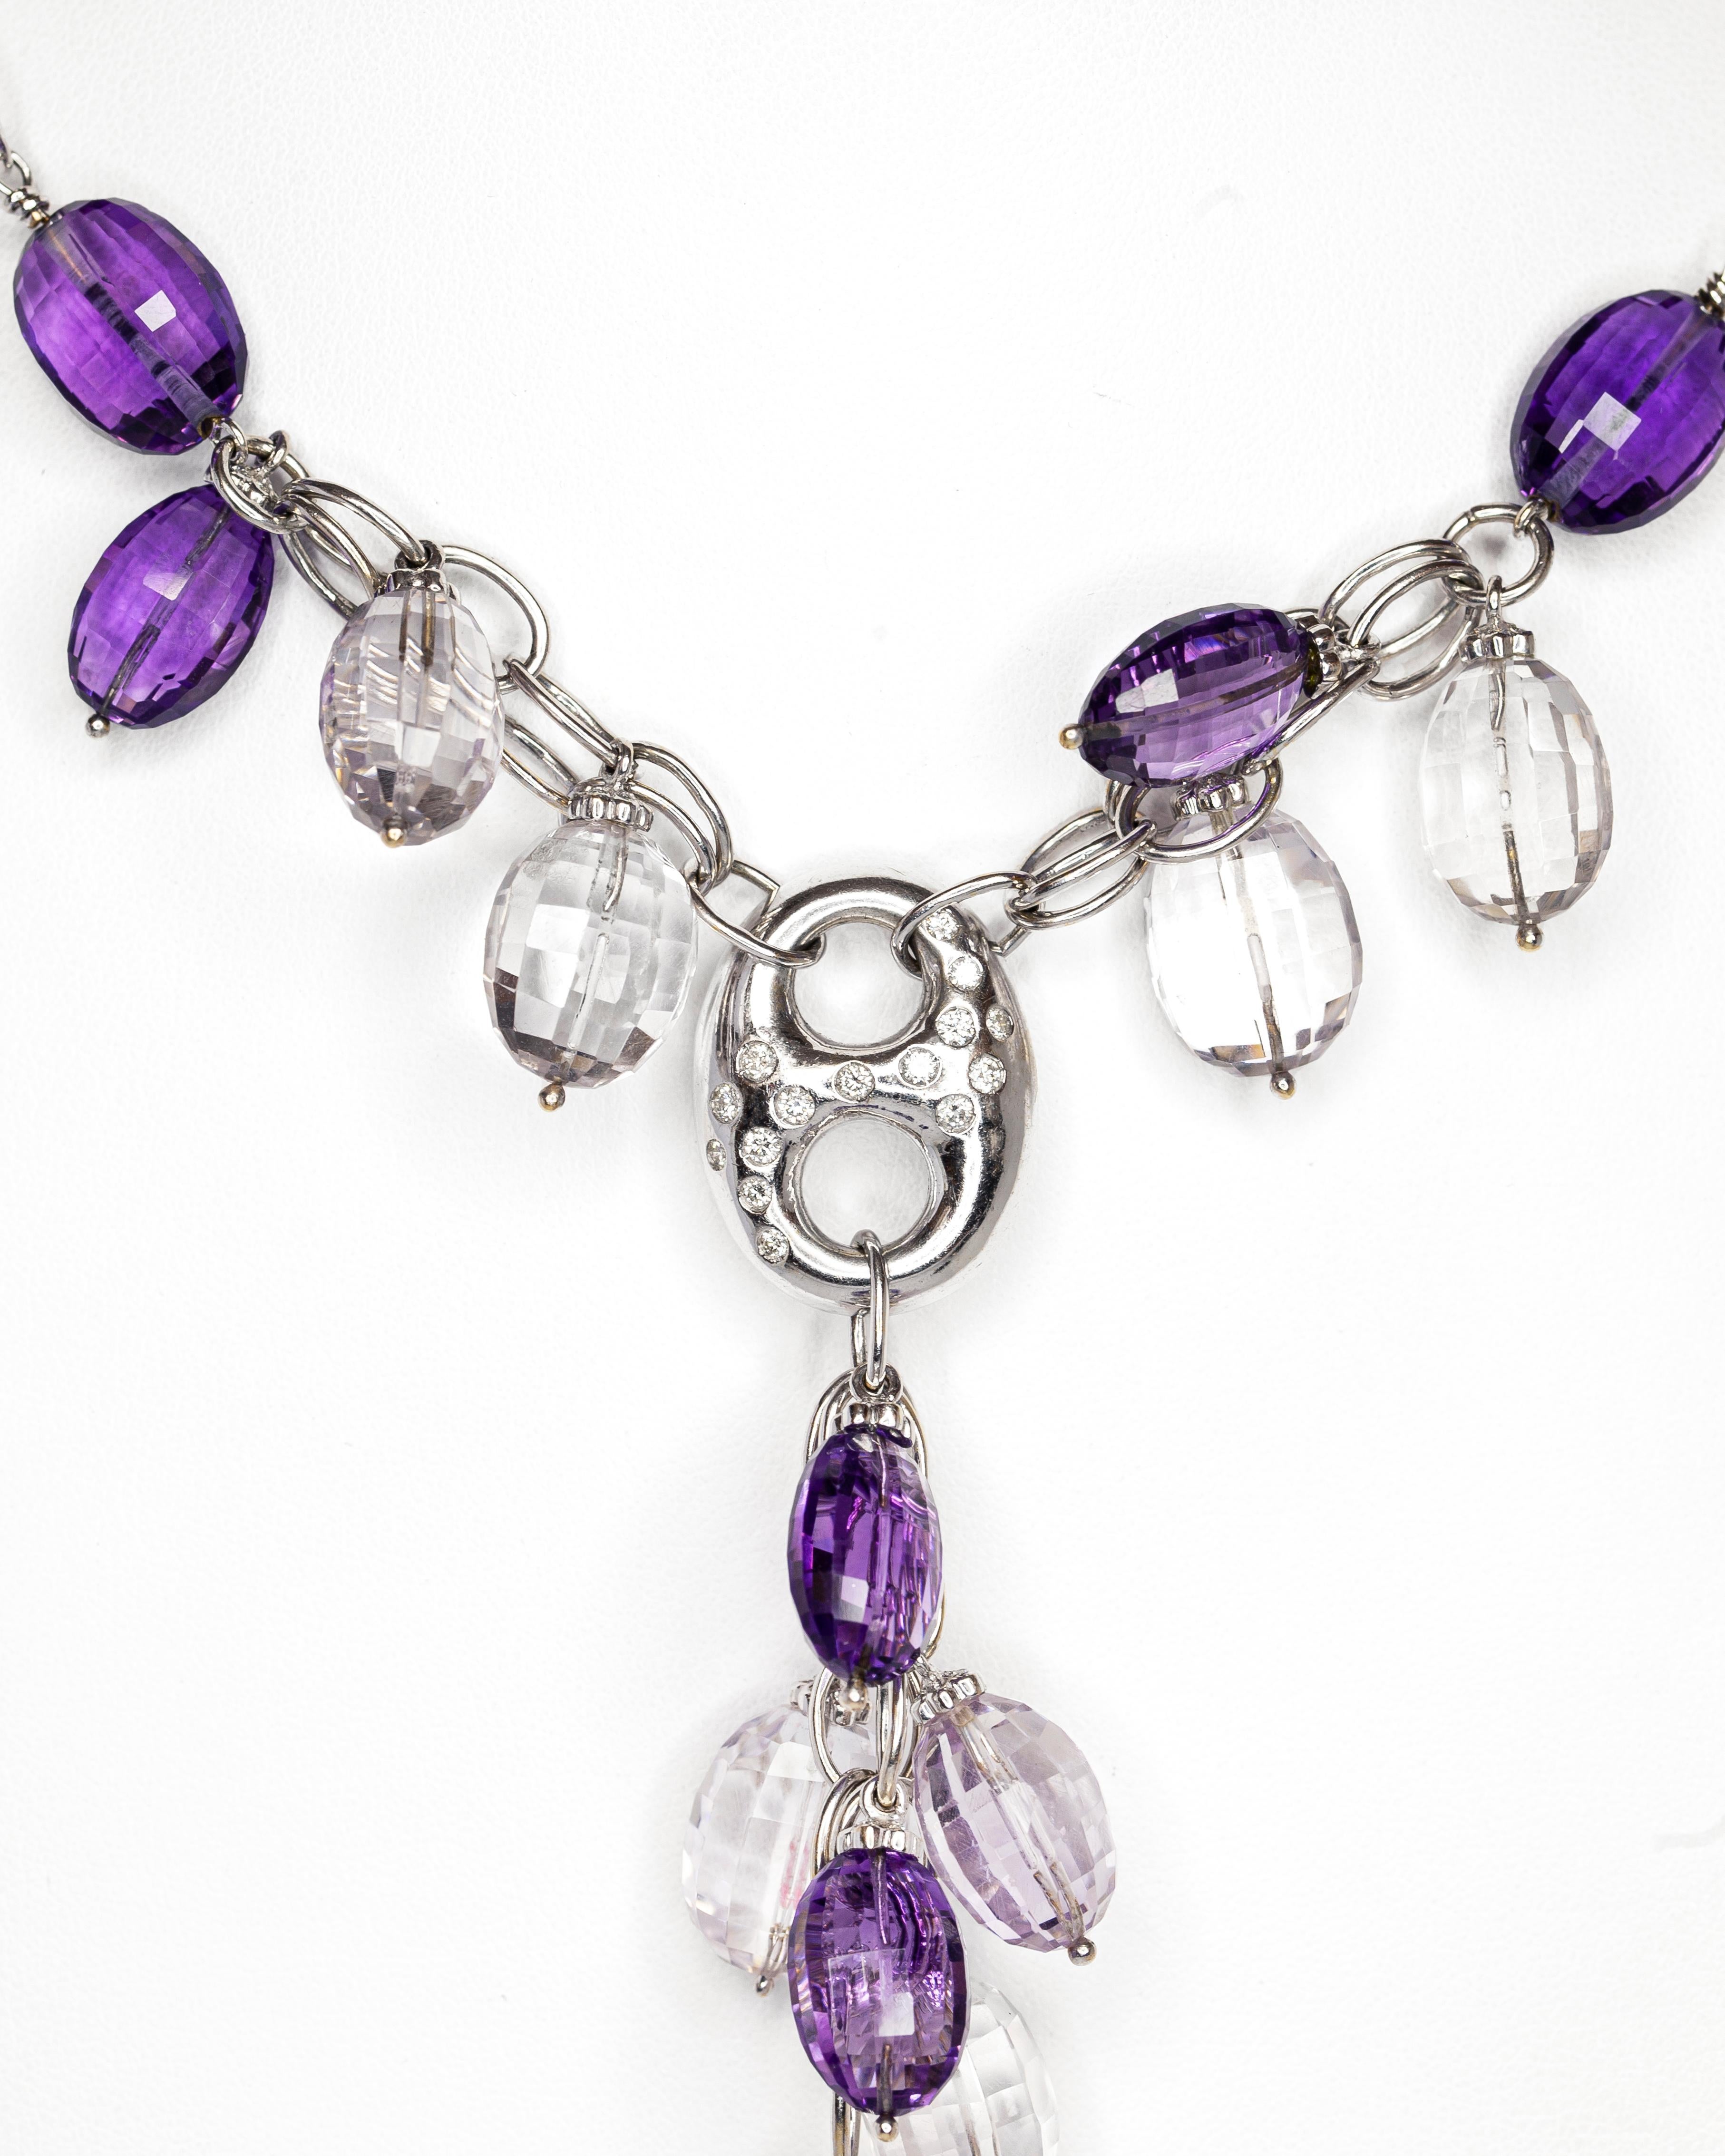 This incredible 1960s style necklace boasts 17 purple amethyst and colourless briolettes (cut beads) which cascade into a stunning drop. This piece is accentuated with a beautiful diamond- set pendant. The dangling briolettes are also embellished